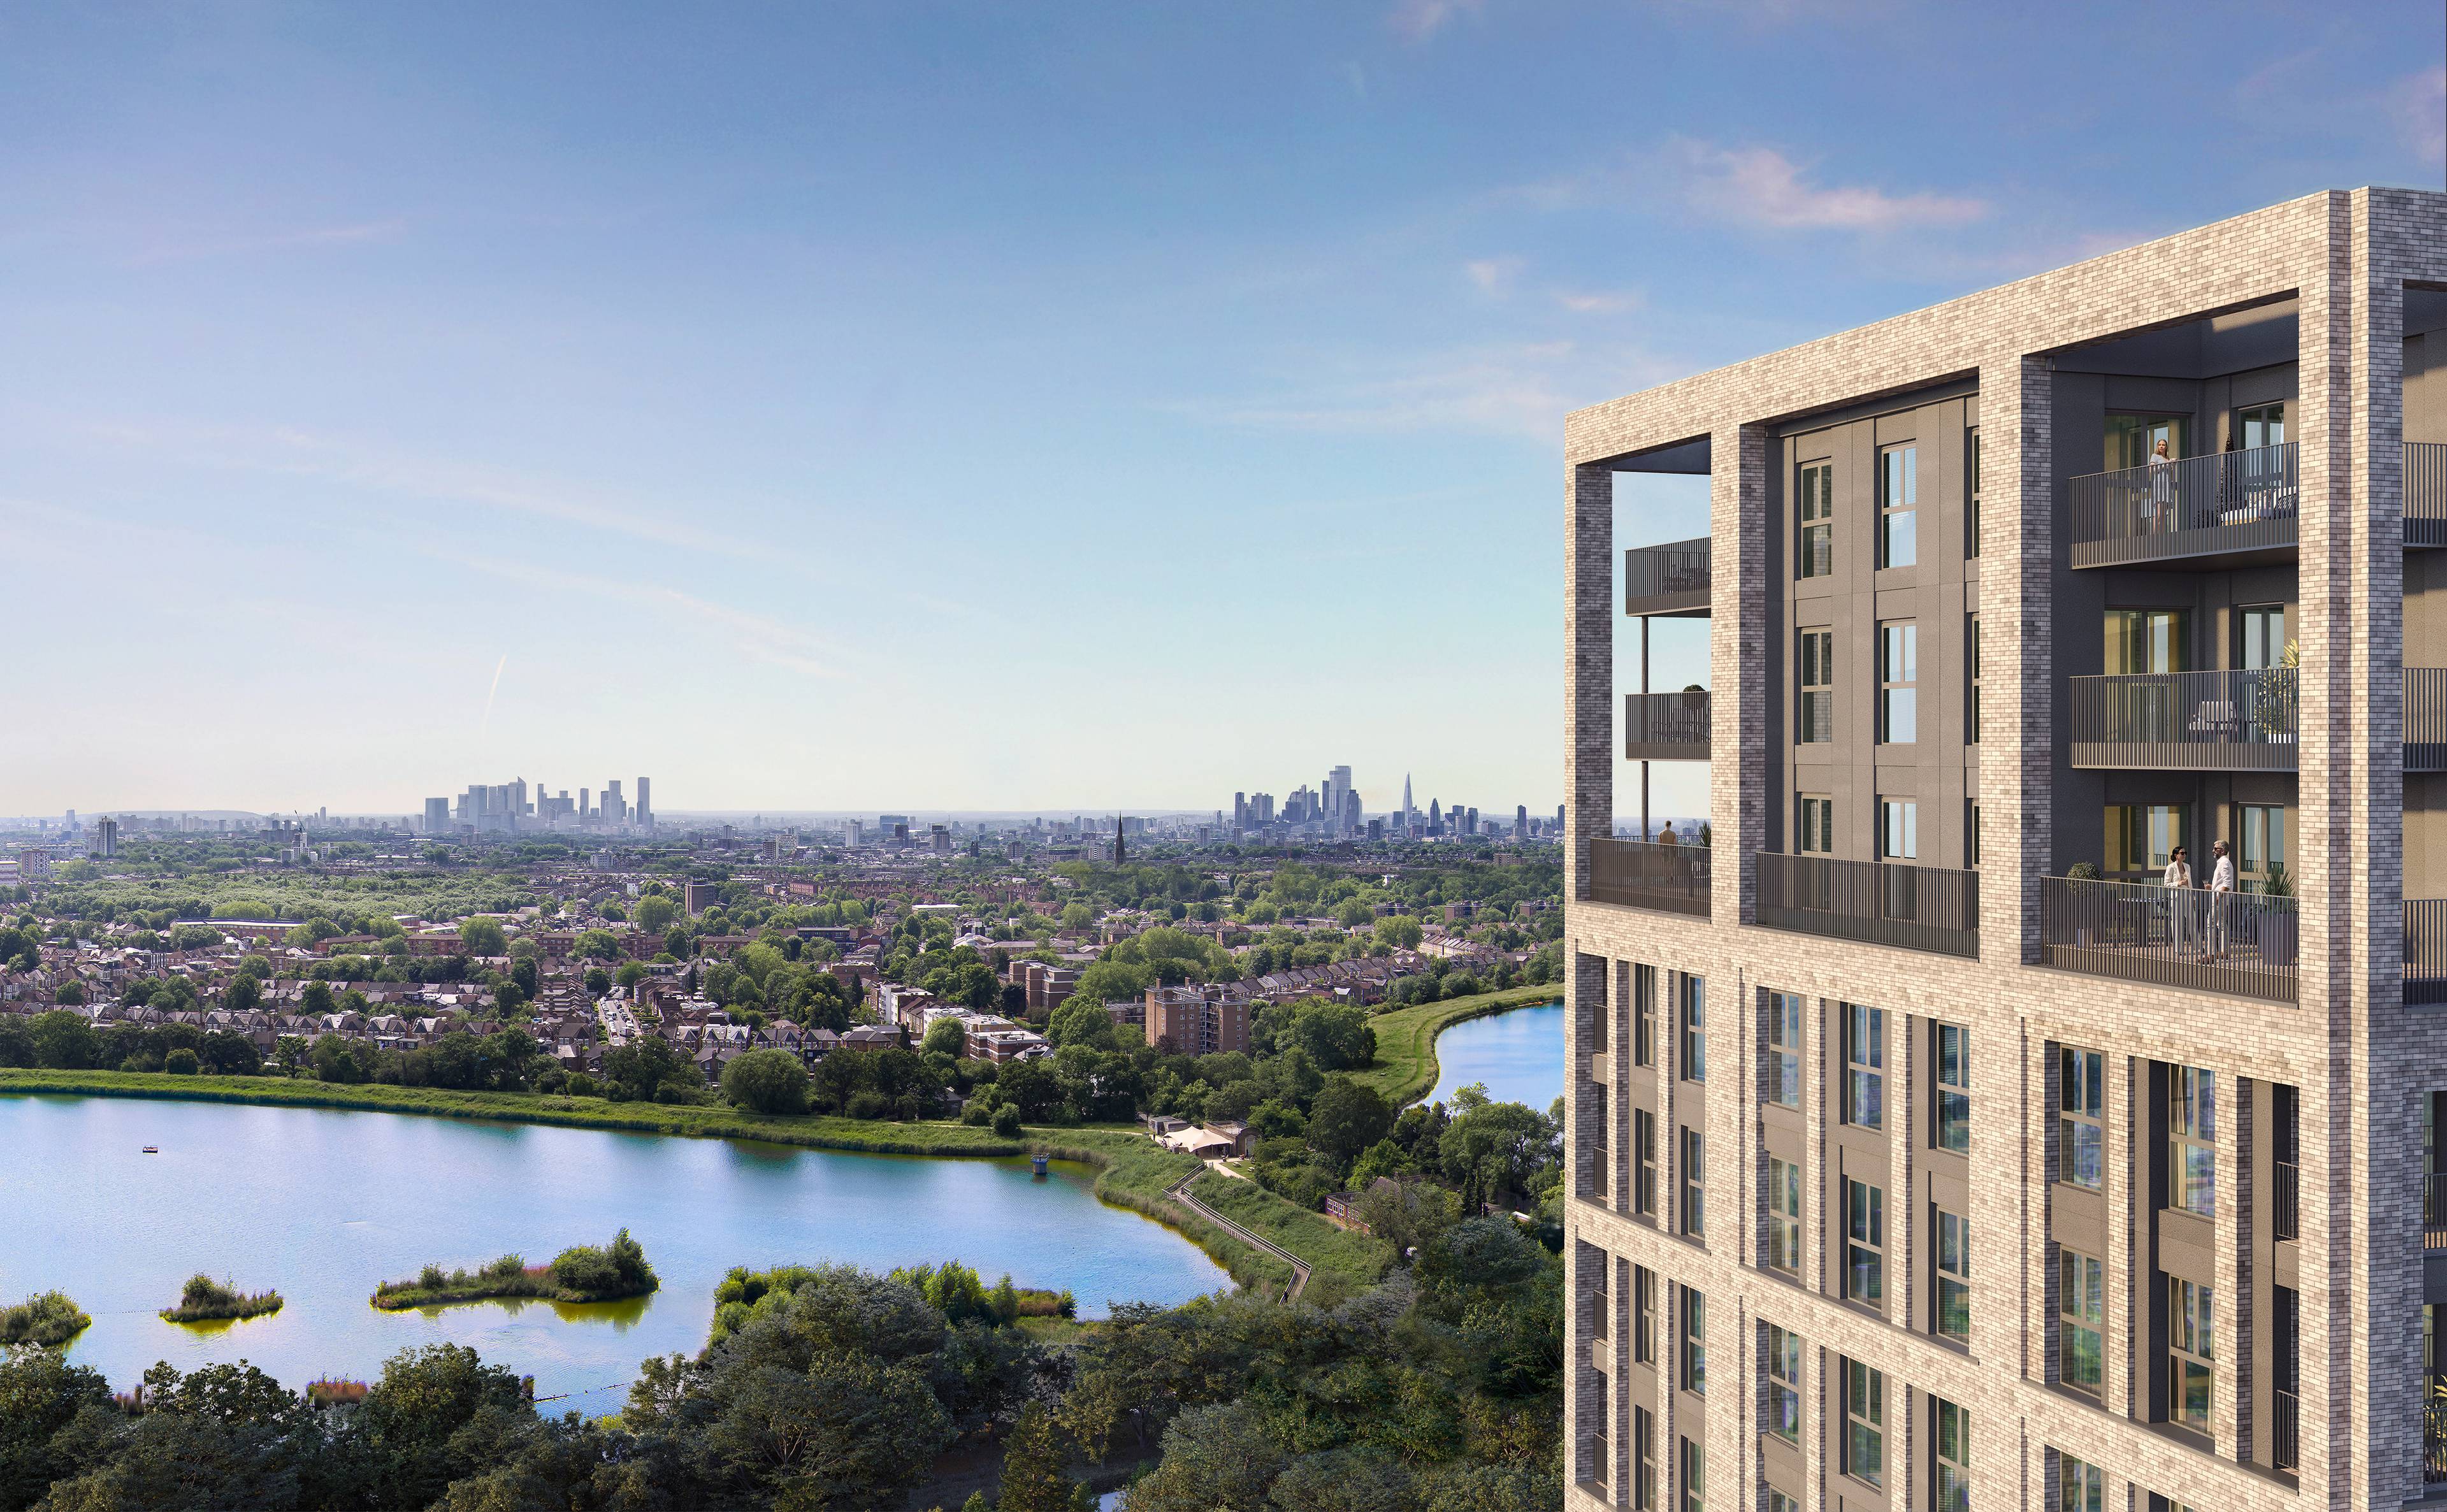 Hidden Oasis, 10 minutes from Central London -  Luxury 2-Bedroom Apartment in a Stunning New Development Surrounded by Nature - Seventh Floor - City Skyline Views